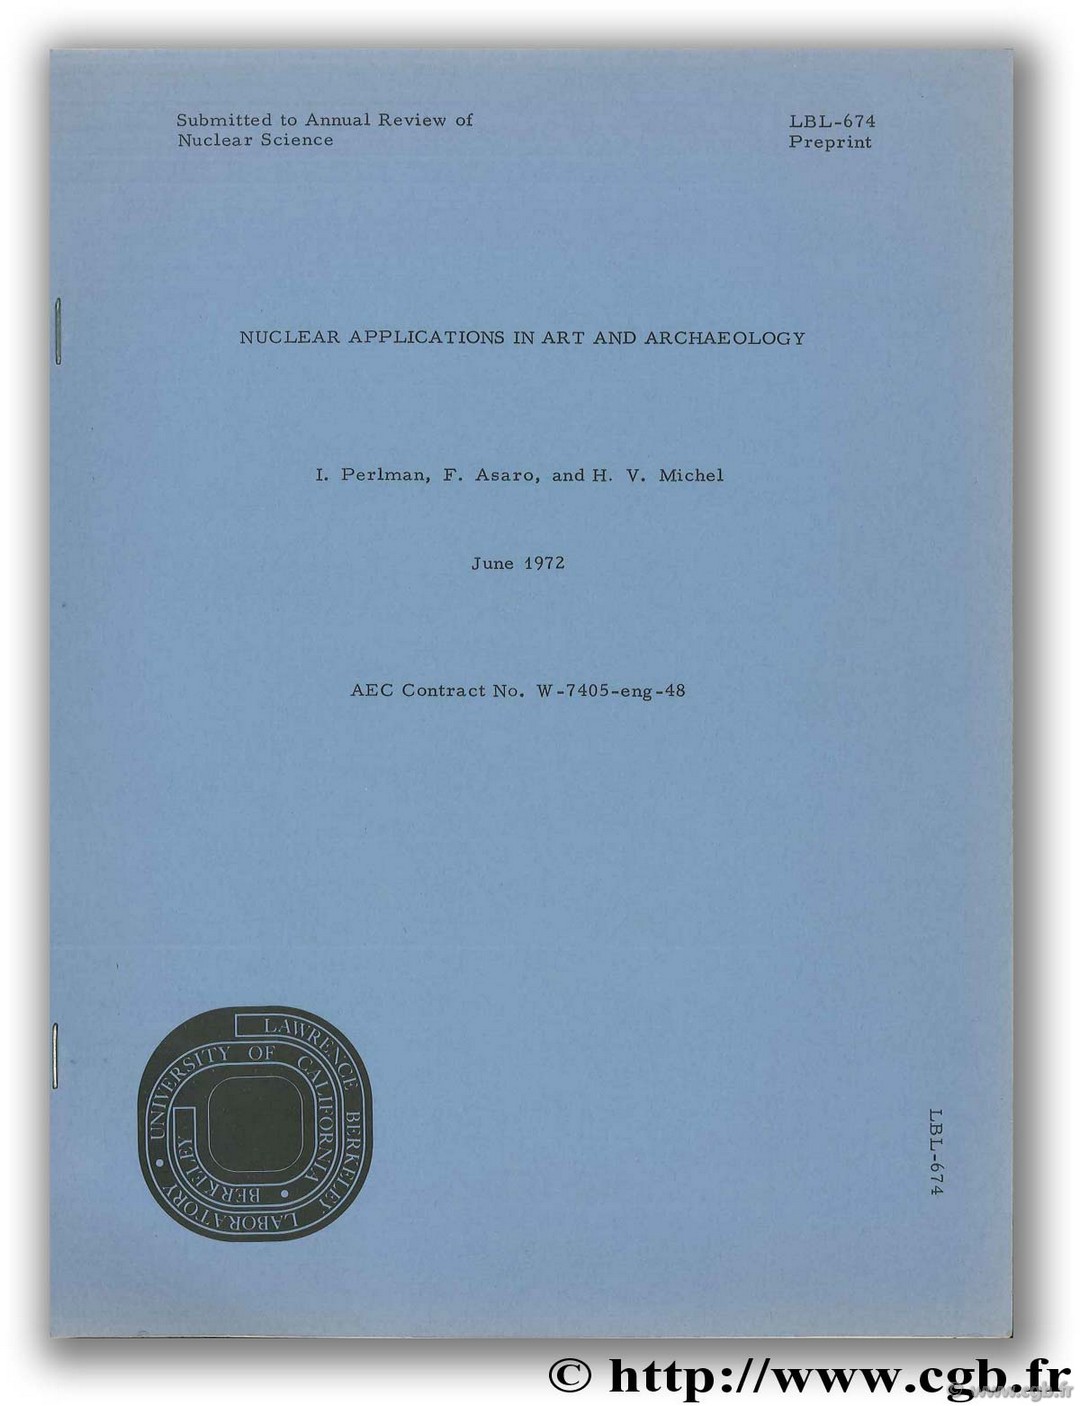 Nuclear applications in art and archaeology PERLMAN I., ASARO F., MICHEL H.-V.